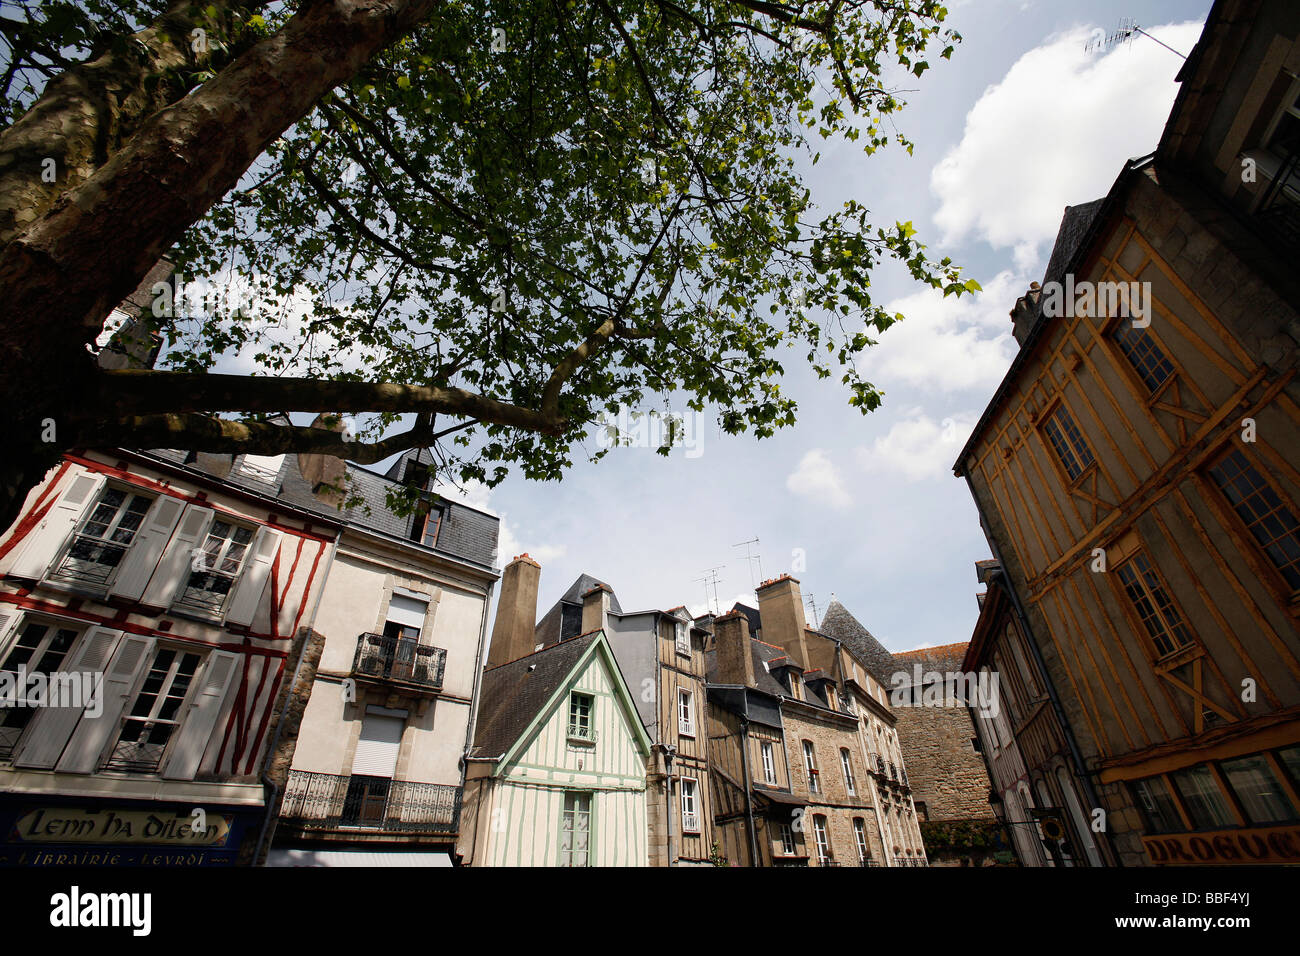 Old city center, Vannes, France Stock Photo